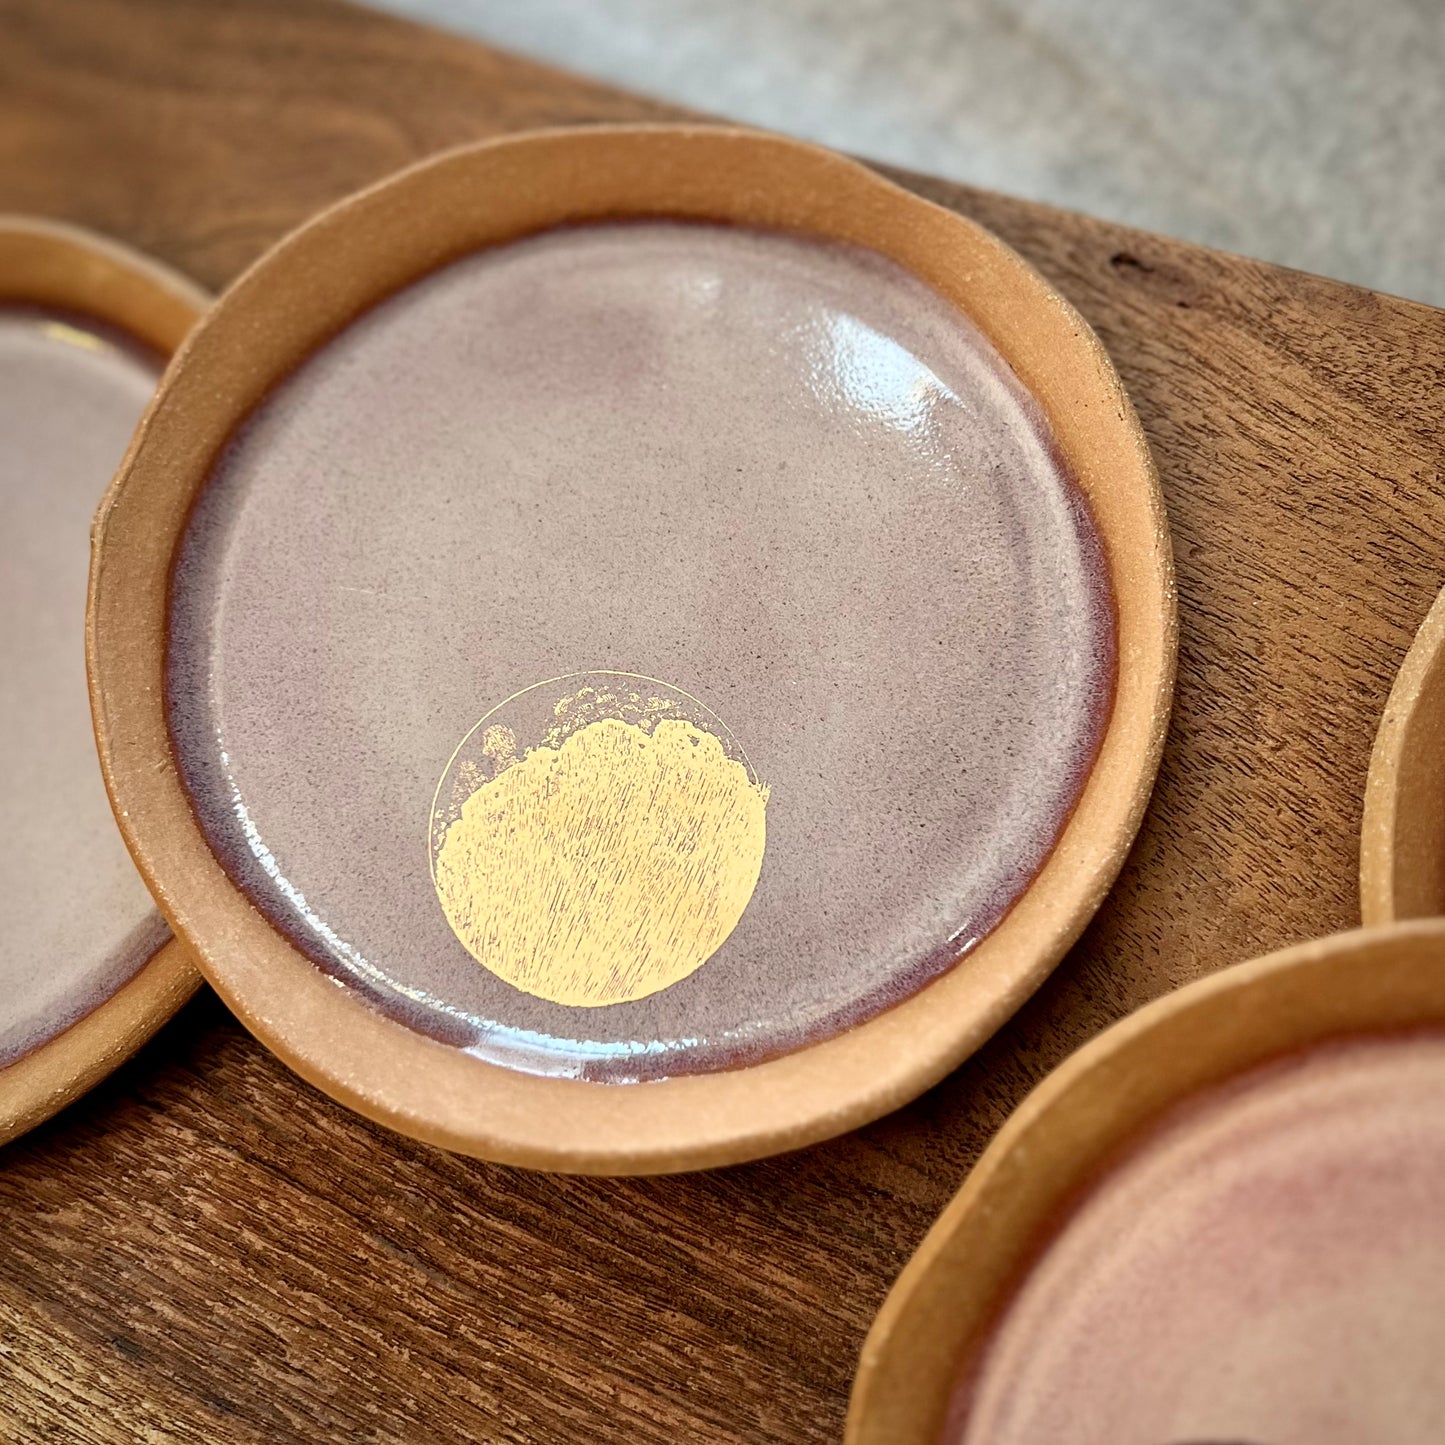 22k gold moon dishes